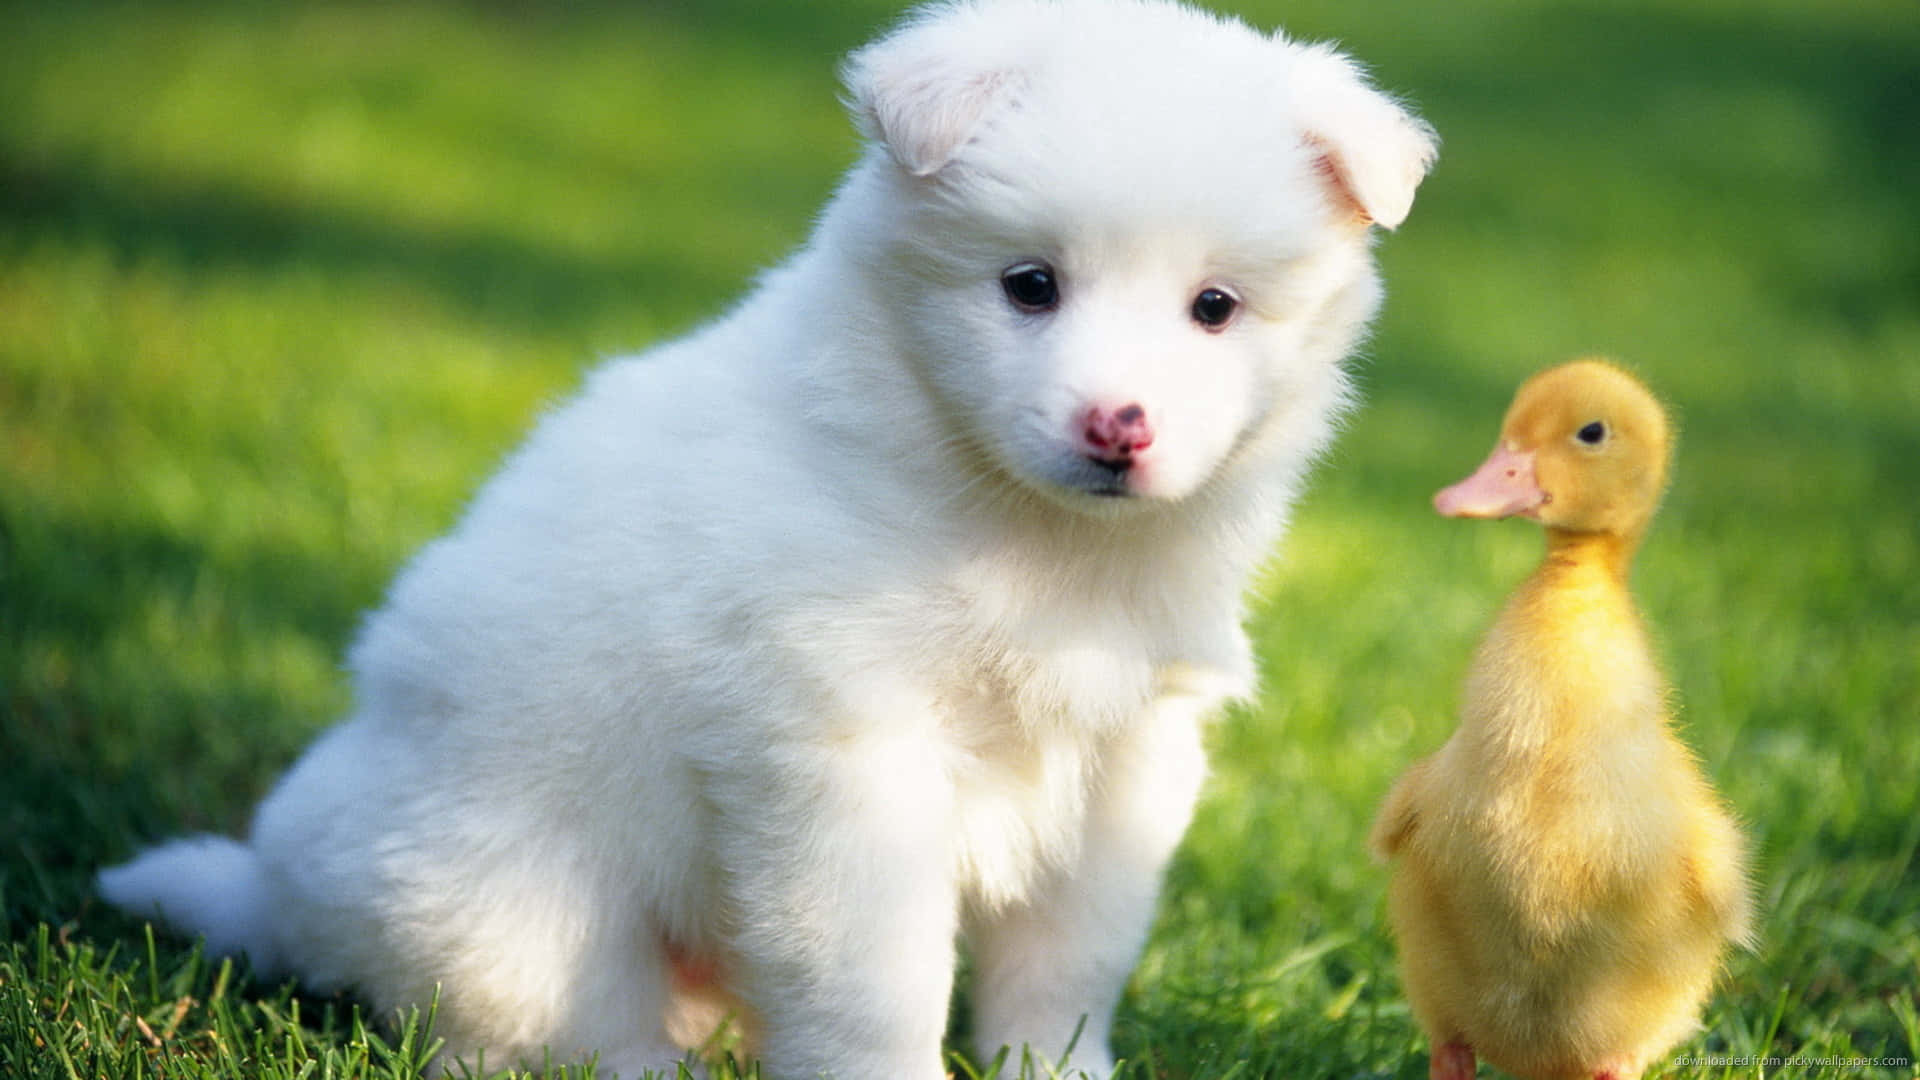 Cute Duck With A Puppy